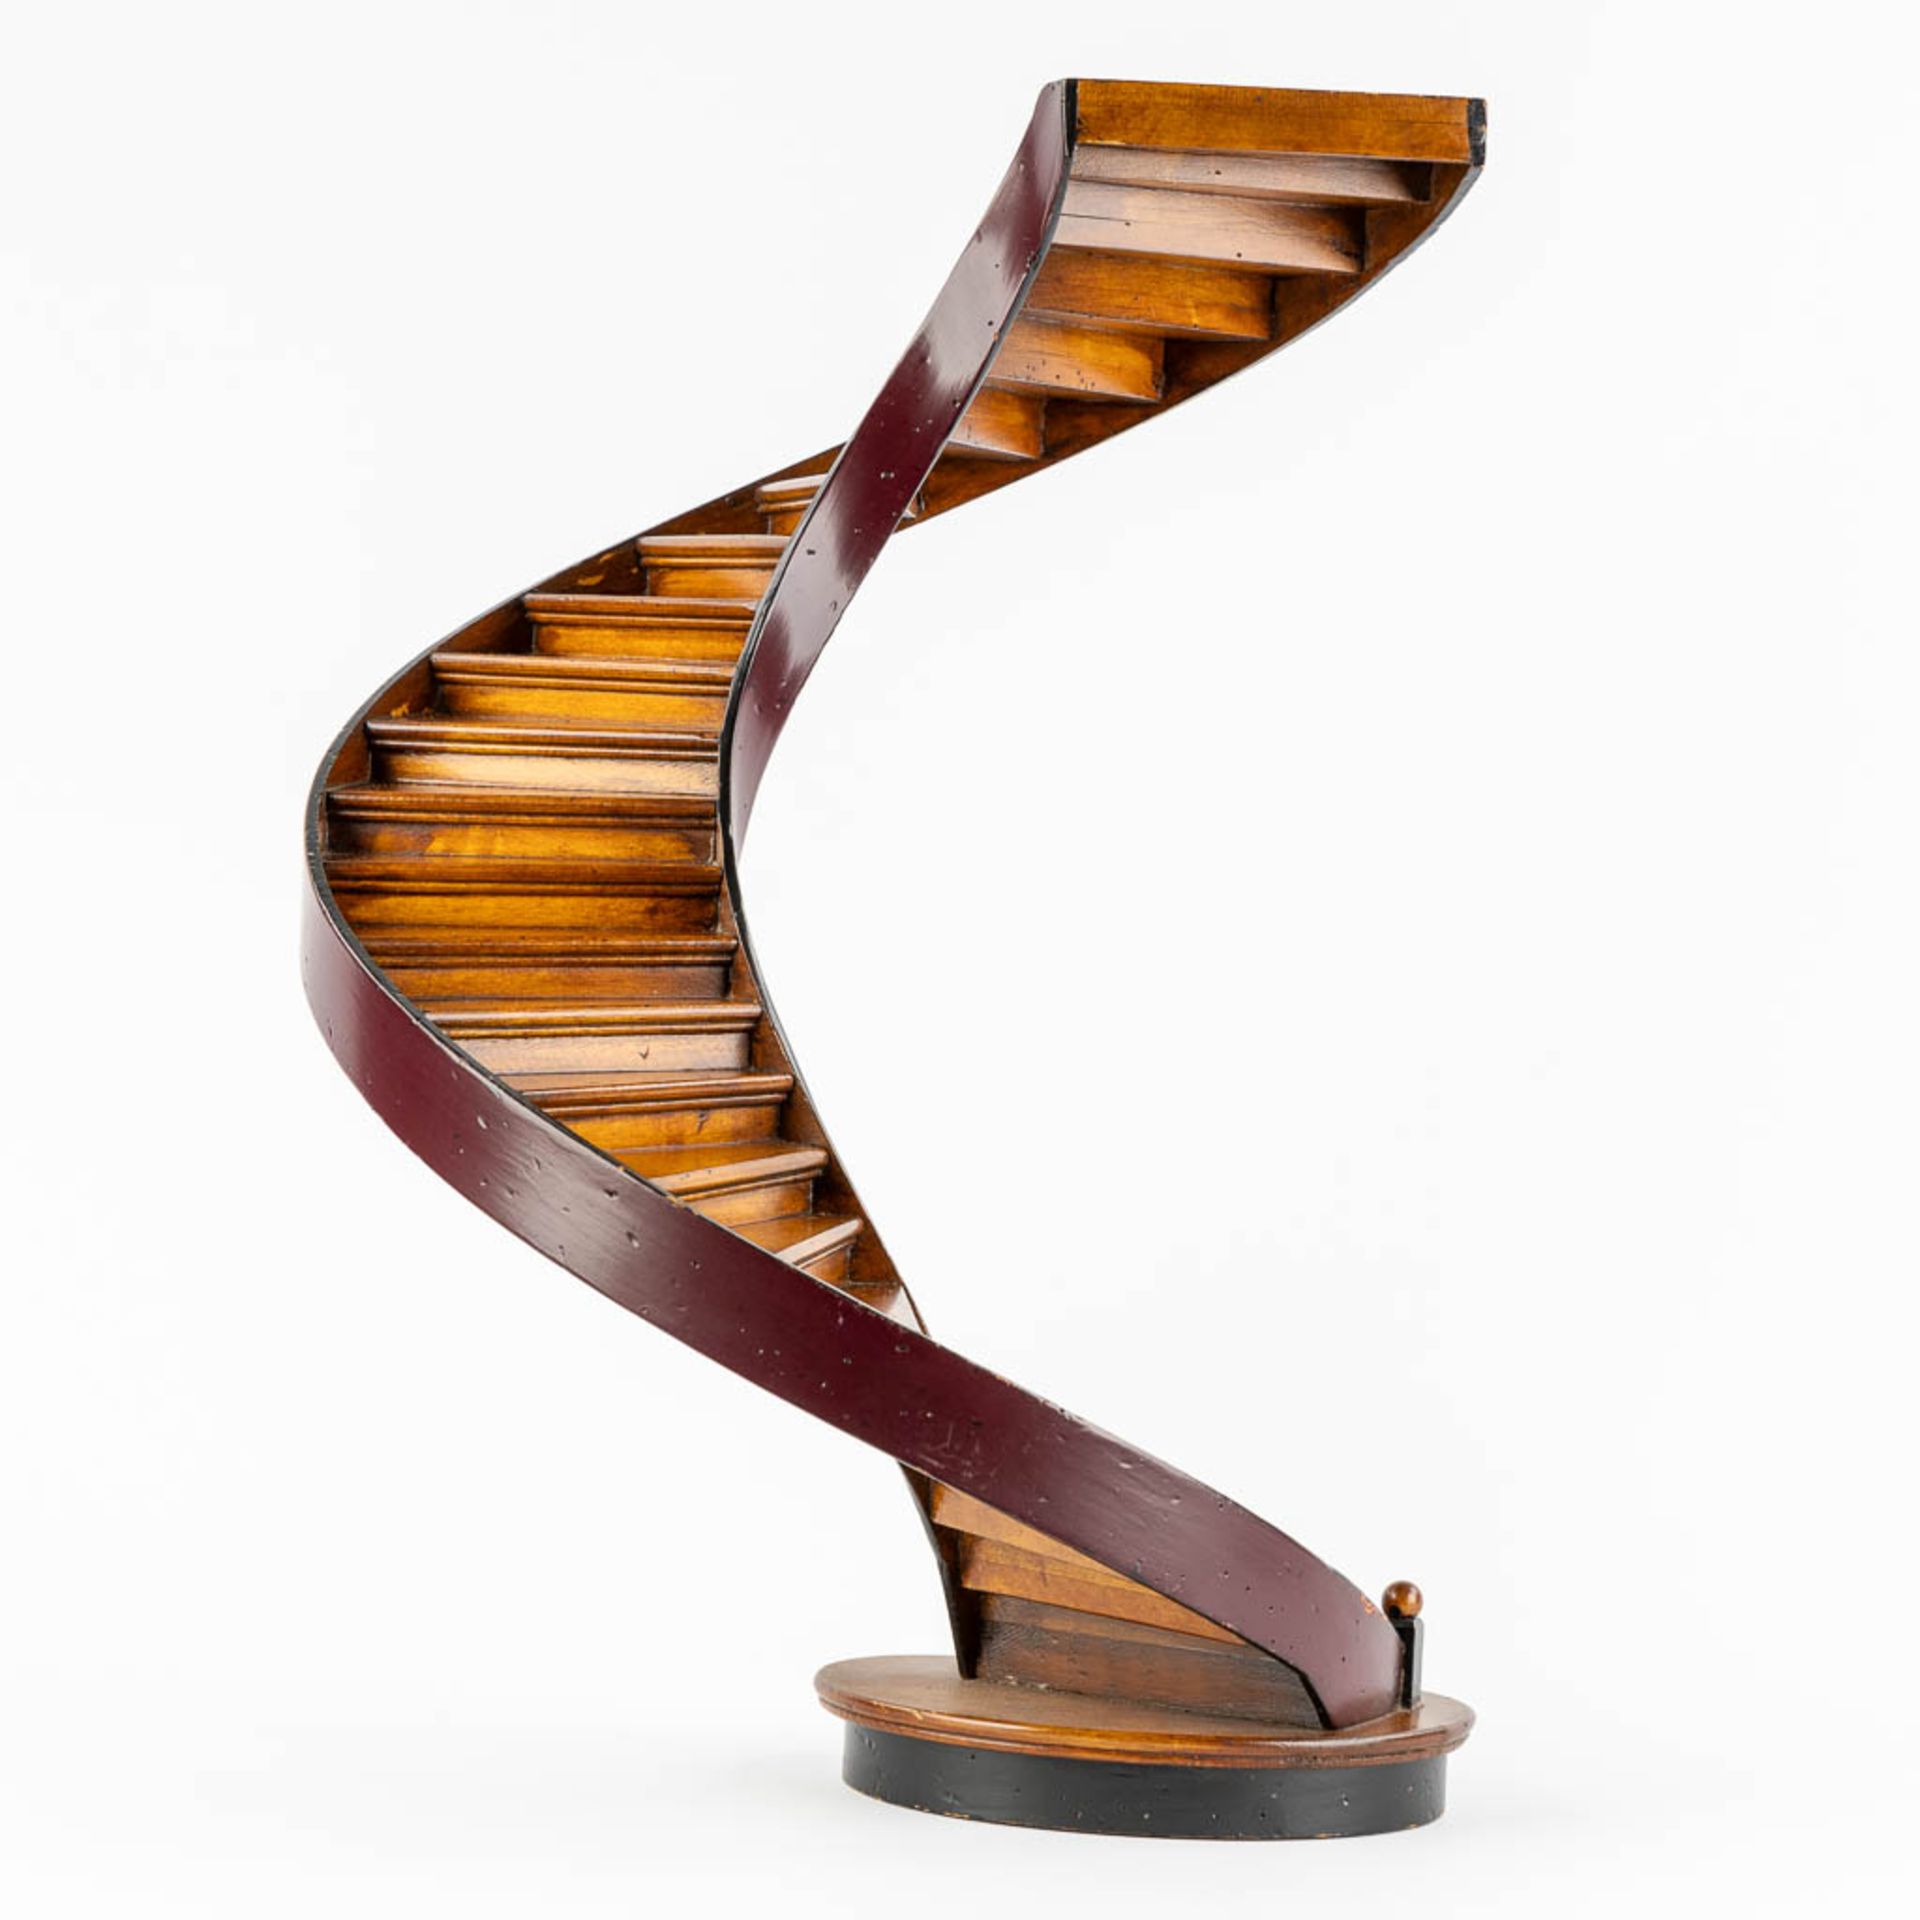 An architectural model of a revolving staircase, wood. 20th C. (H:47,5 x D:29 cm) - Image 5 of 11